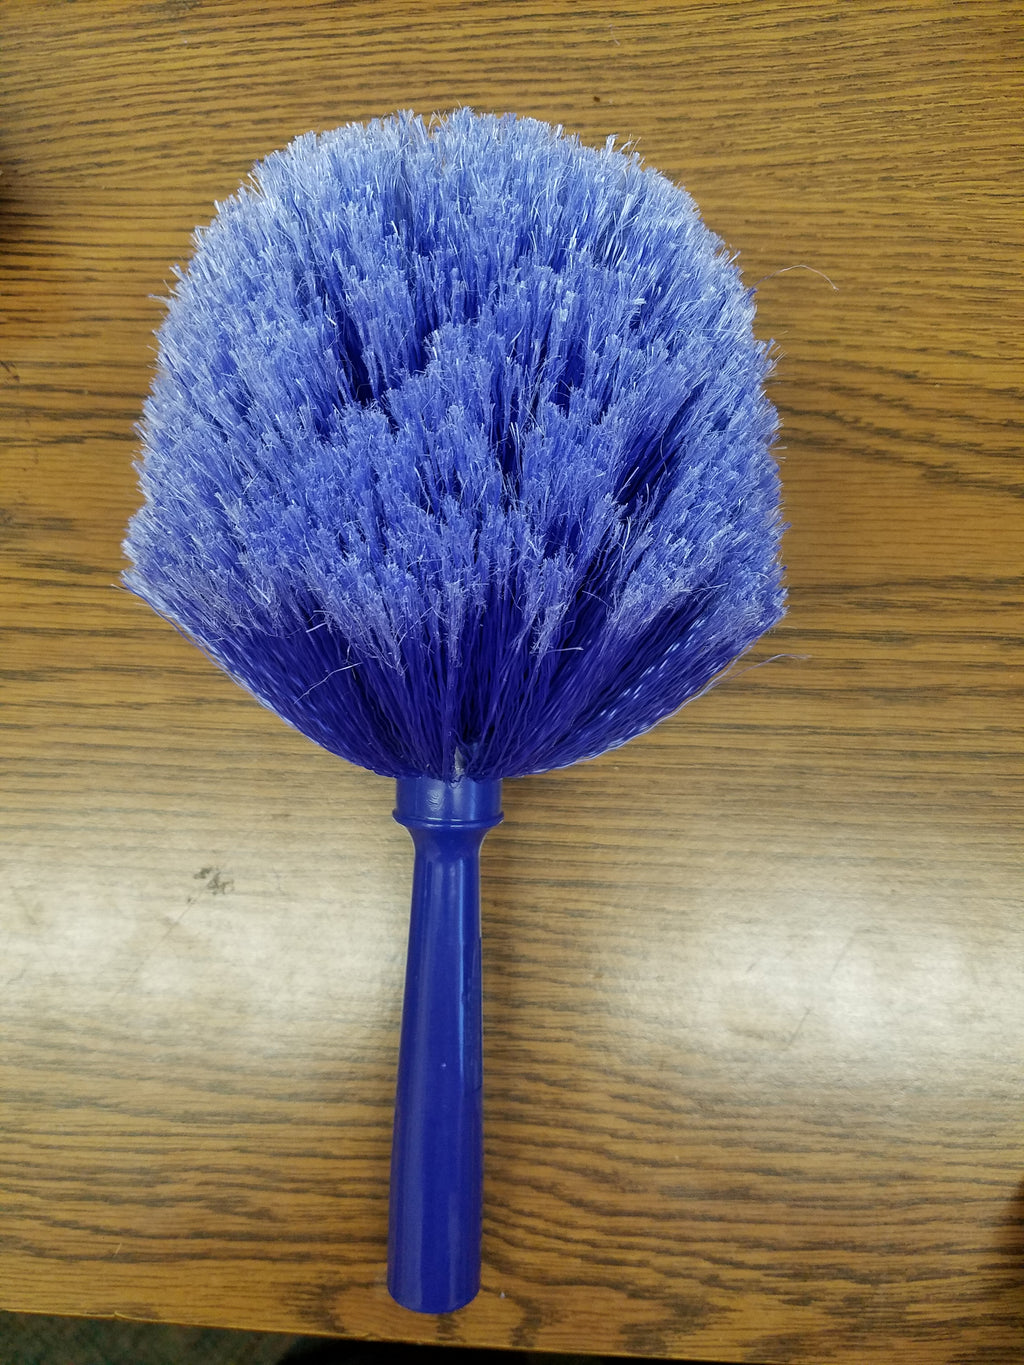 Web Duster head sold by Summit Distribution and Cleaning Supplies